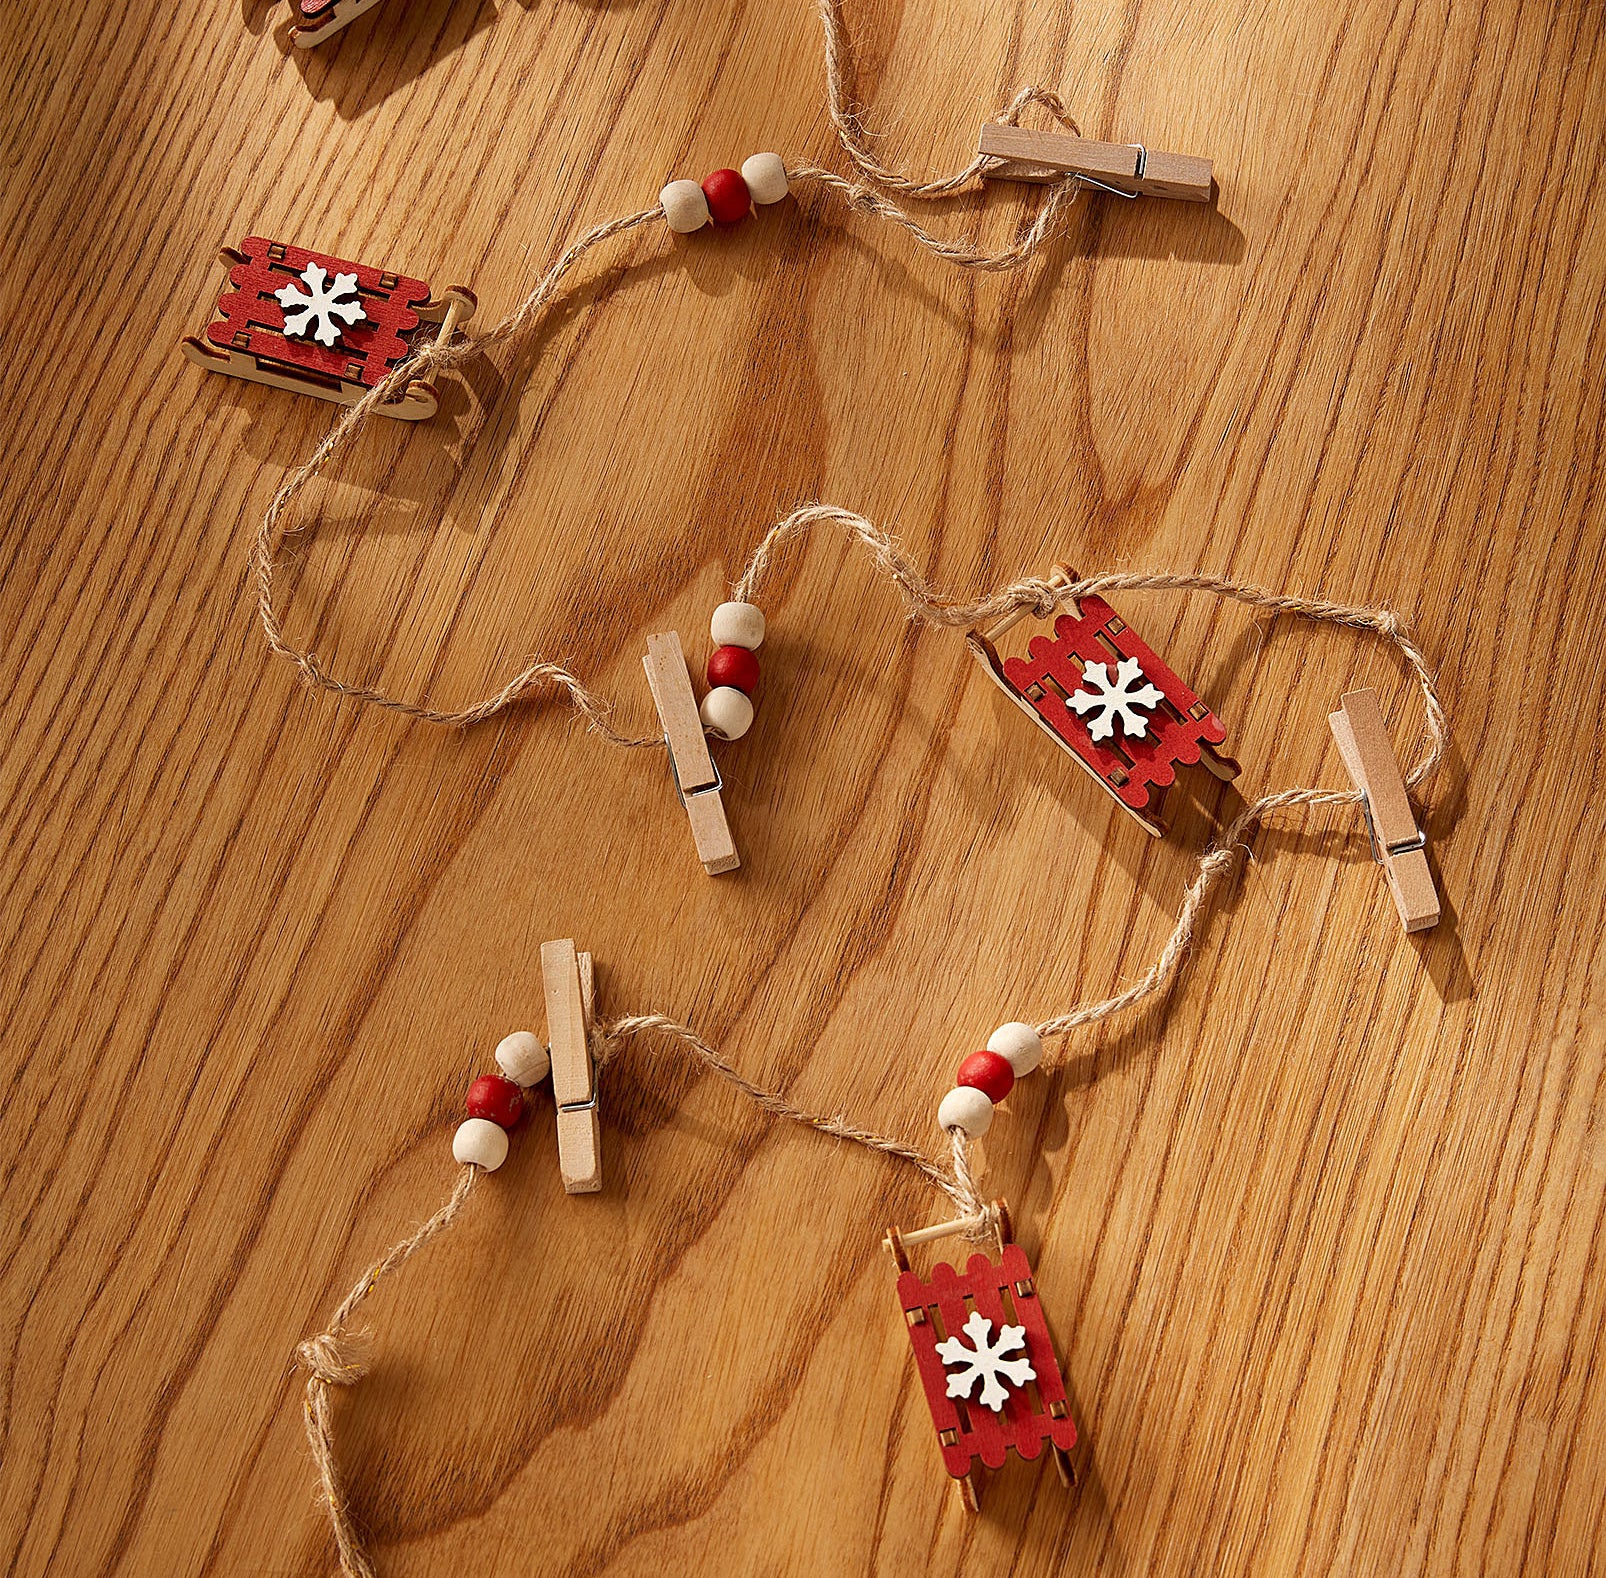 the garland on a wooden table